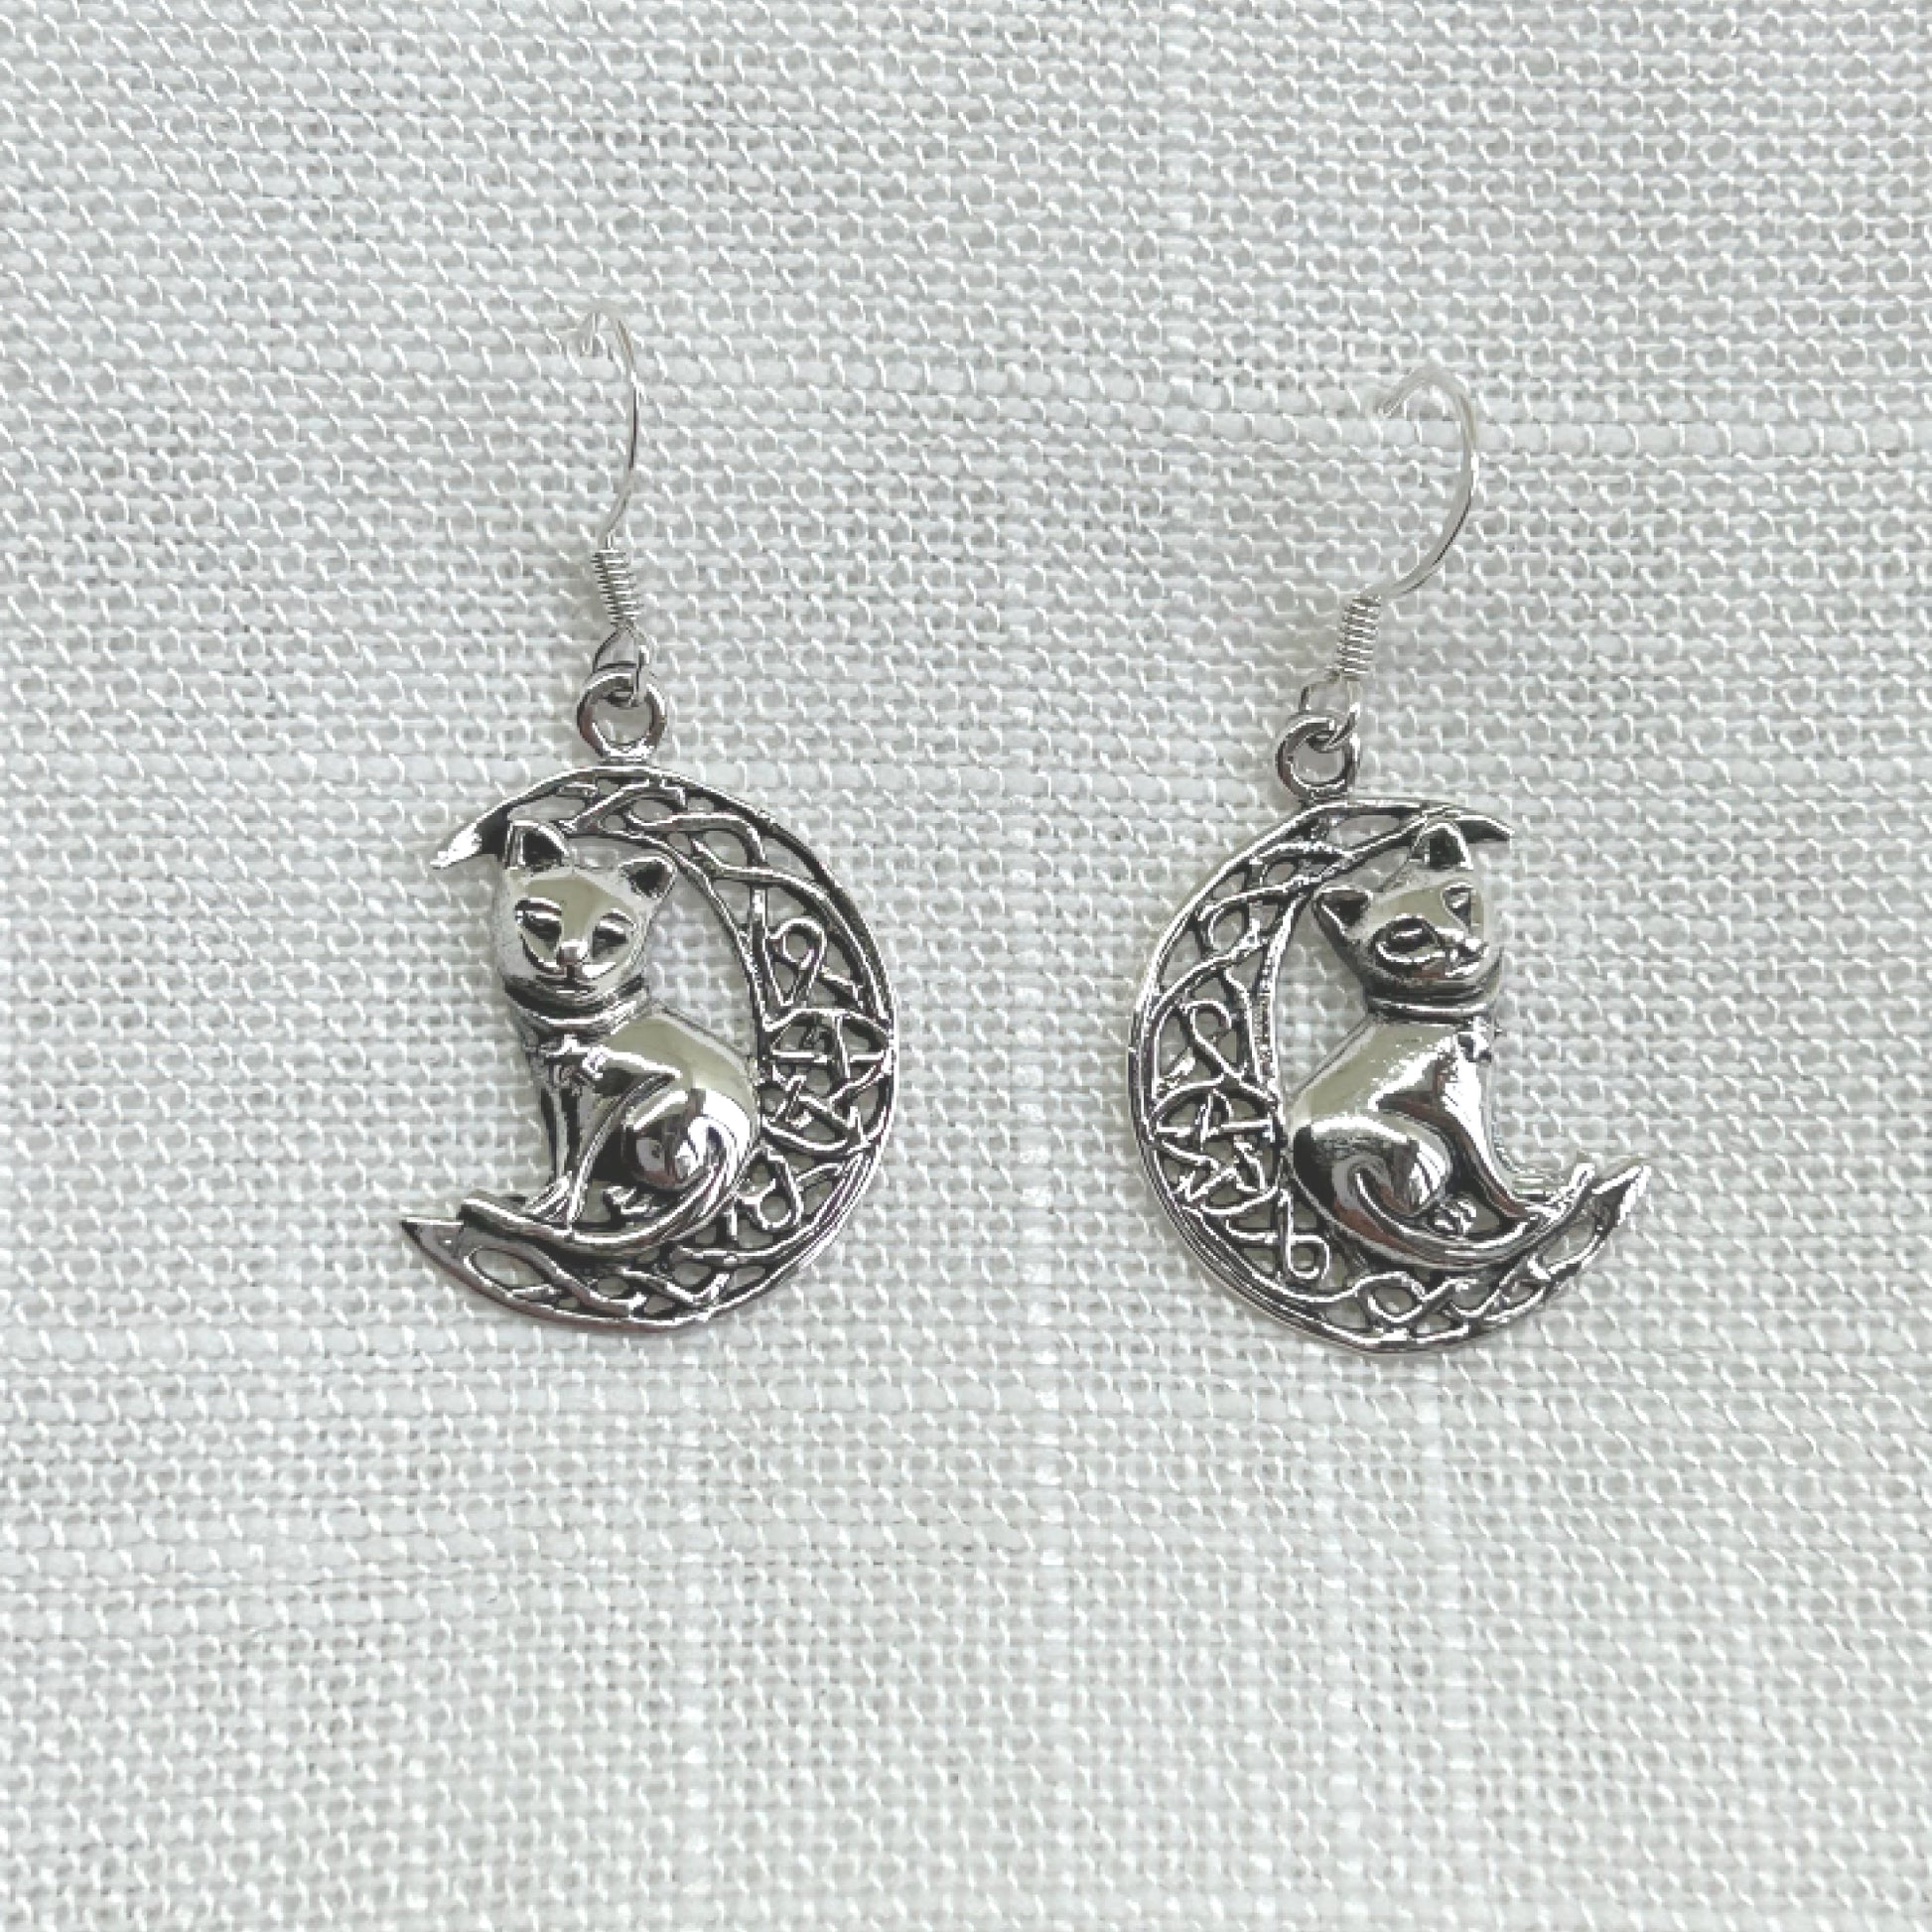 Delicately crafted in 925 silver with a detailed cat and Celtic knot crescent moon, these earrings are sure to make a unique statement of wisdom, fate, and divination. It features an intricate Celtic knot style crescent moon with a pentacle within the centre and a cat sitting on the crescent. Size from top of hook is approximately 3.5cm by 1.8cm wide. Total weight of each earring is 1.9g. Matching necklace is available.